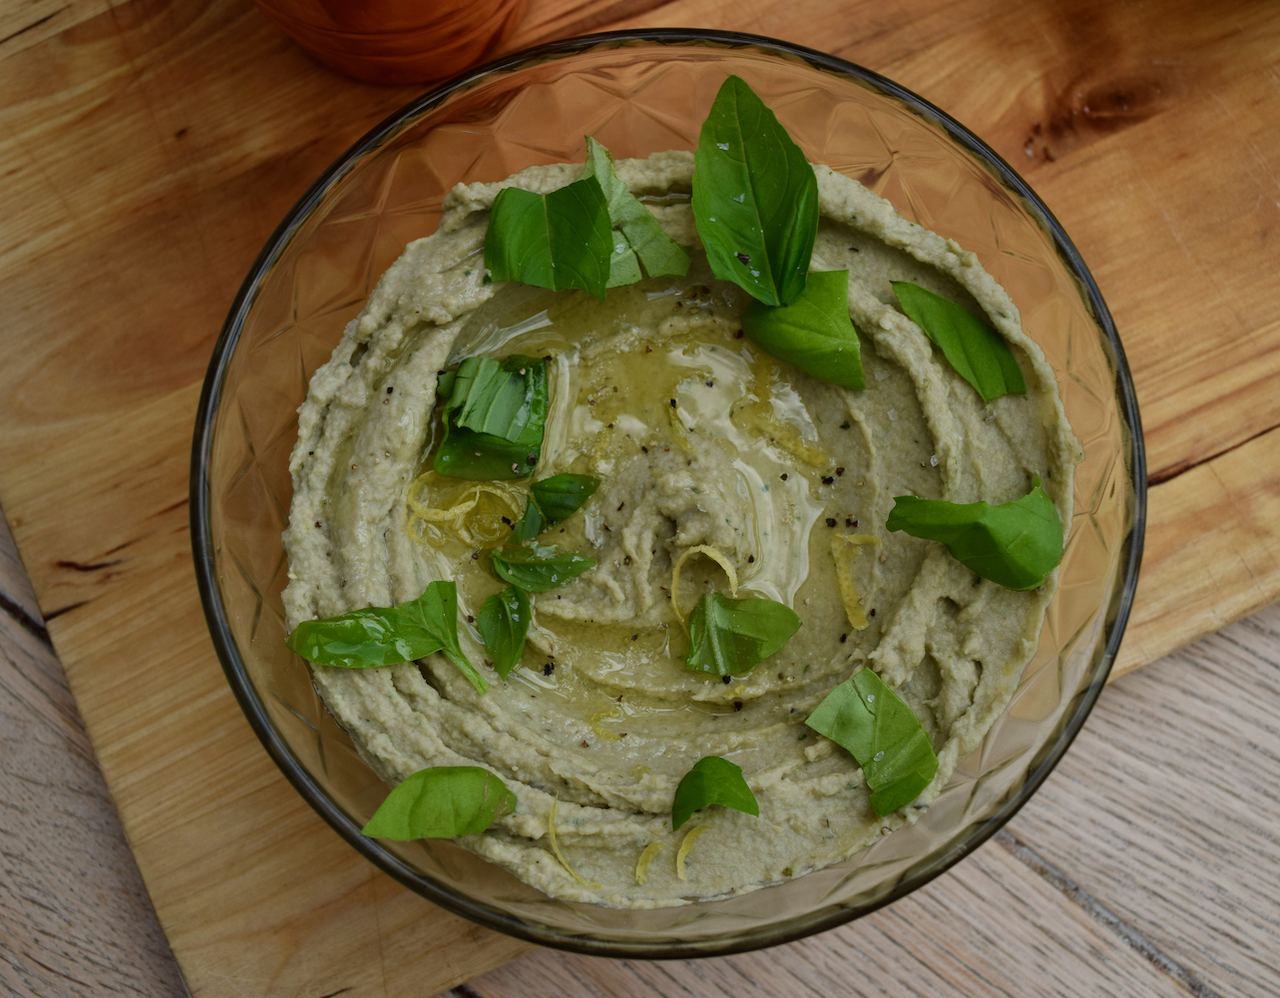 Artichoke and White Bean Dip recipe from Lucy Loves Food Blog